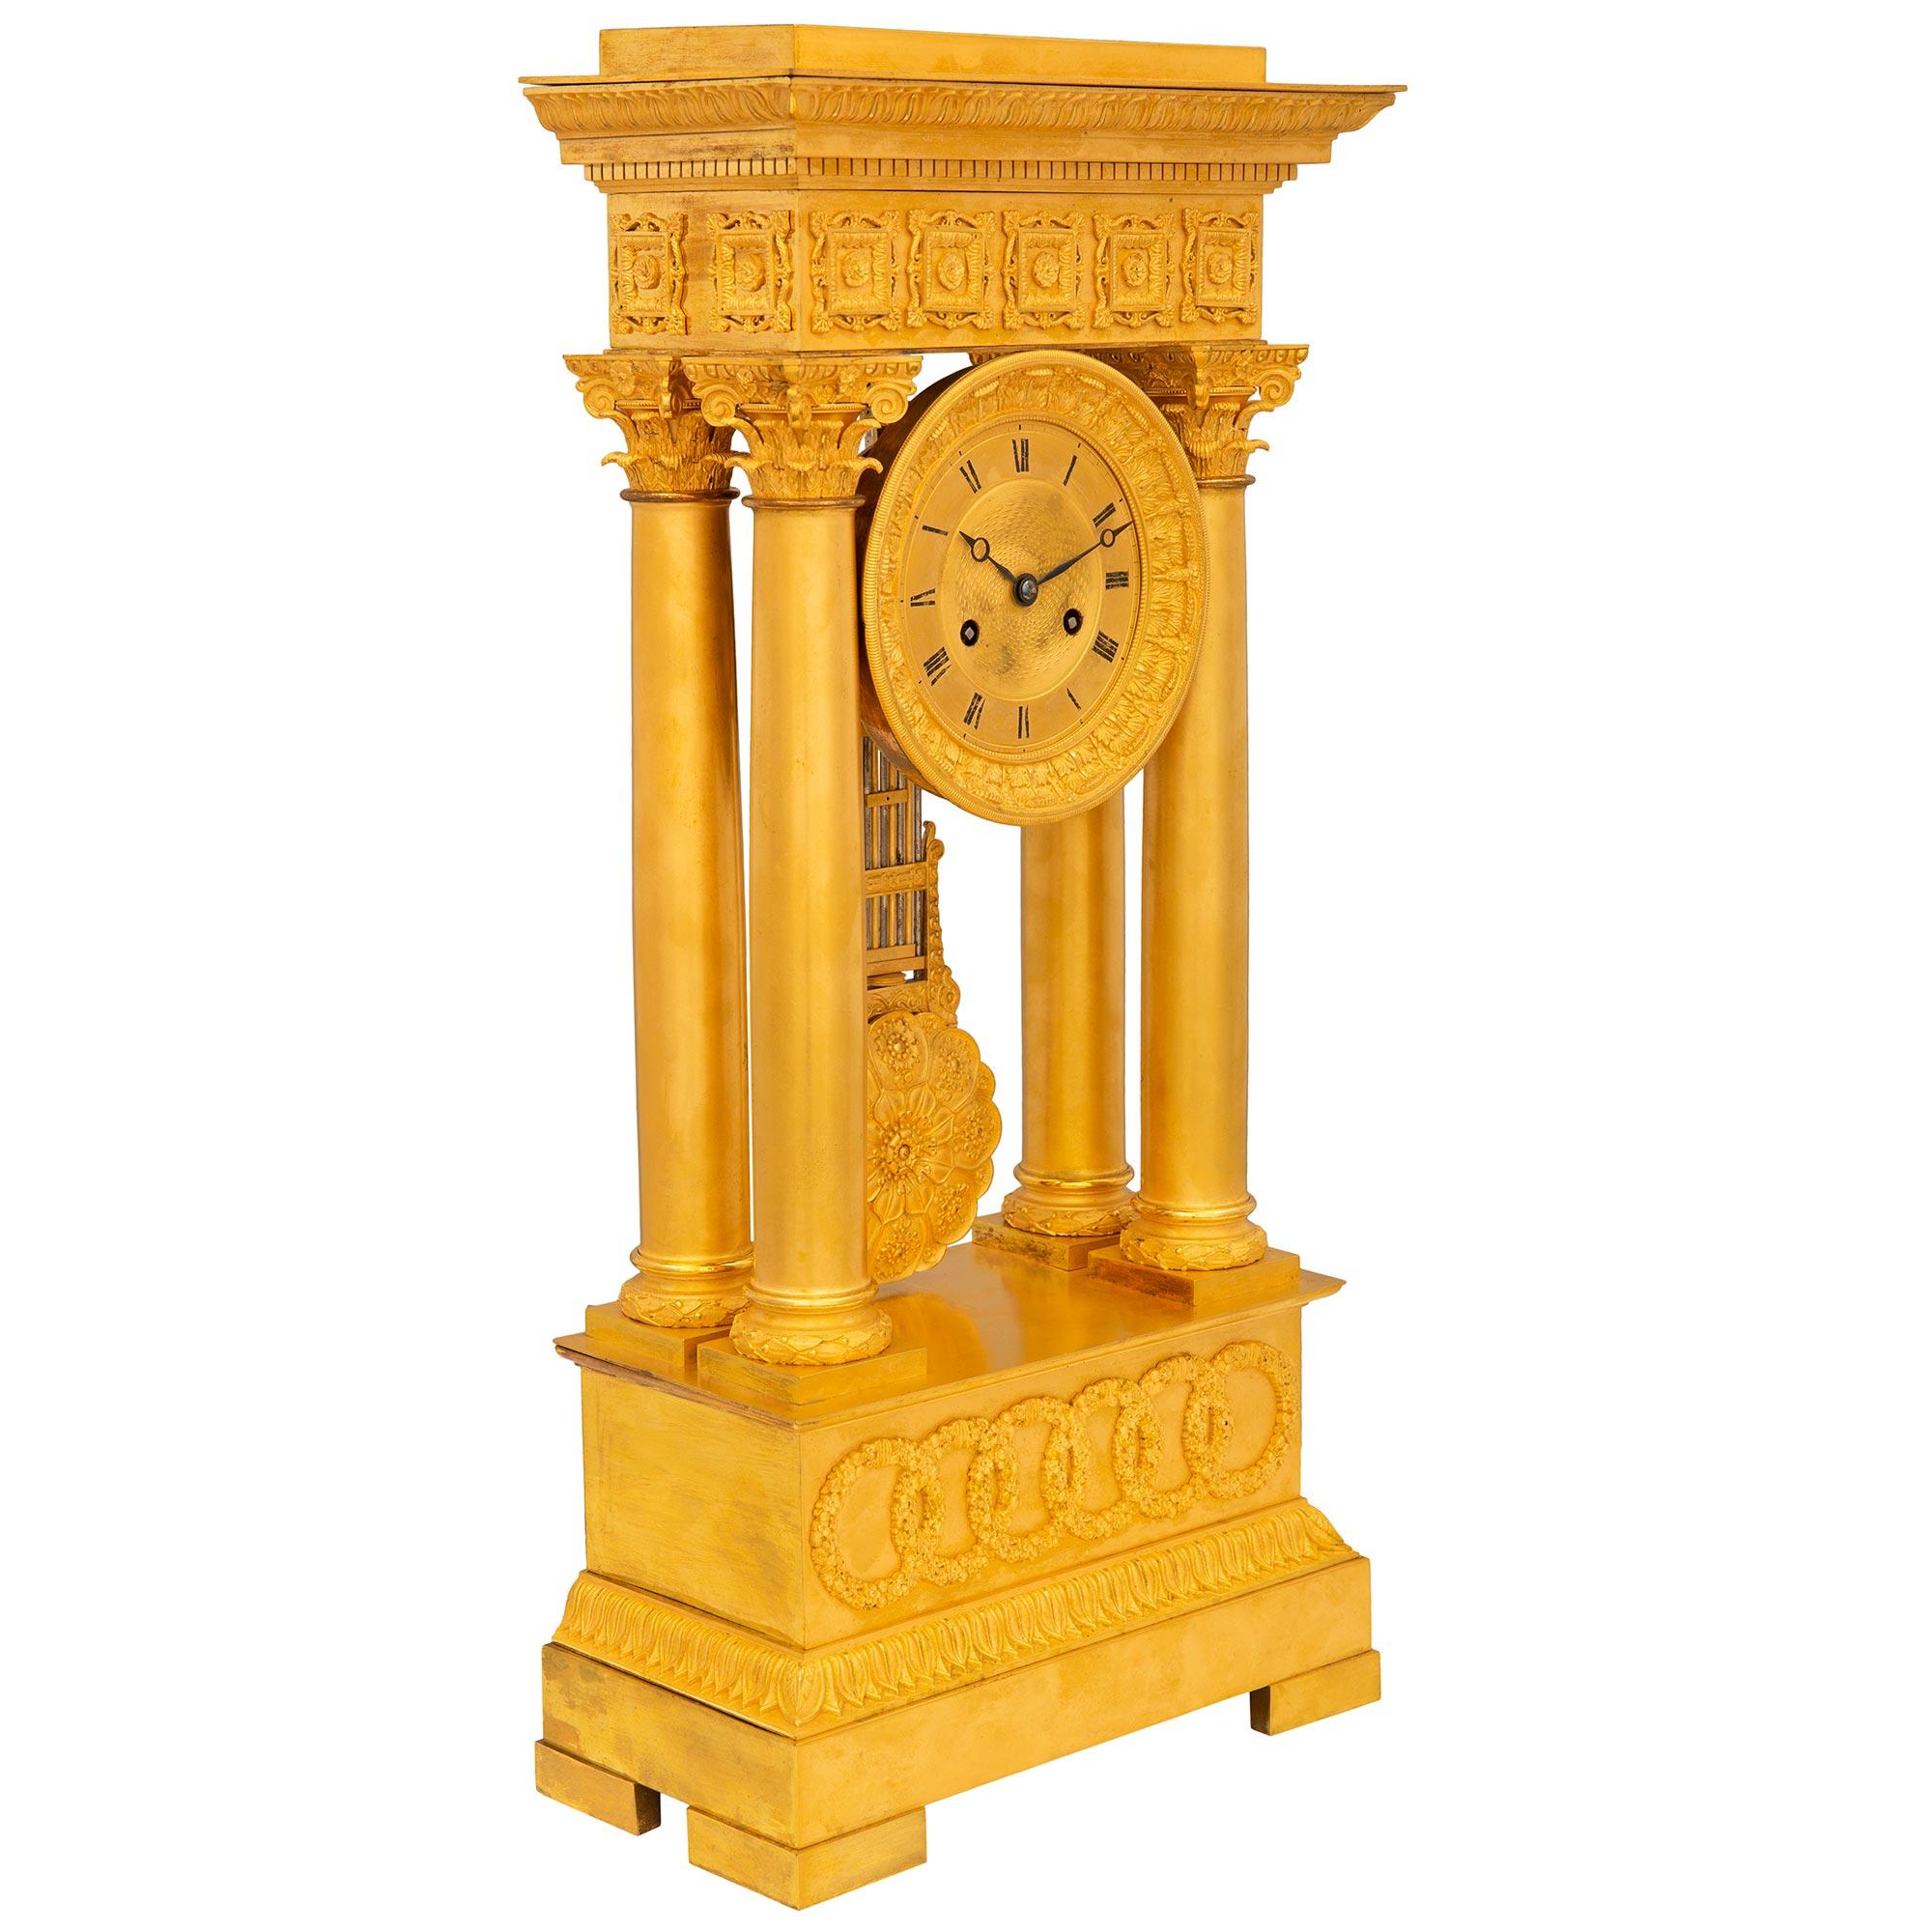 An exquisite French mid 19th century Empire st. ormolu portico clock. The clock raised on a rectangular base with finely chased borders and satin and burnish finish interlocking circles. Above are four ormolu columns with berried laurel plinths and